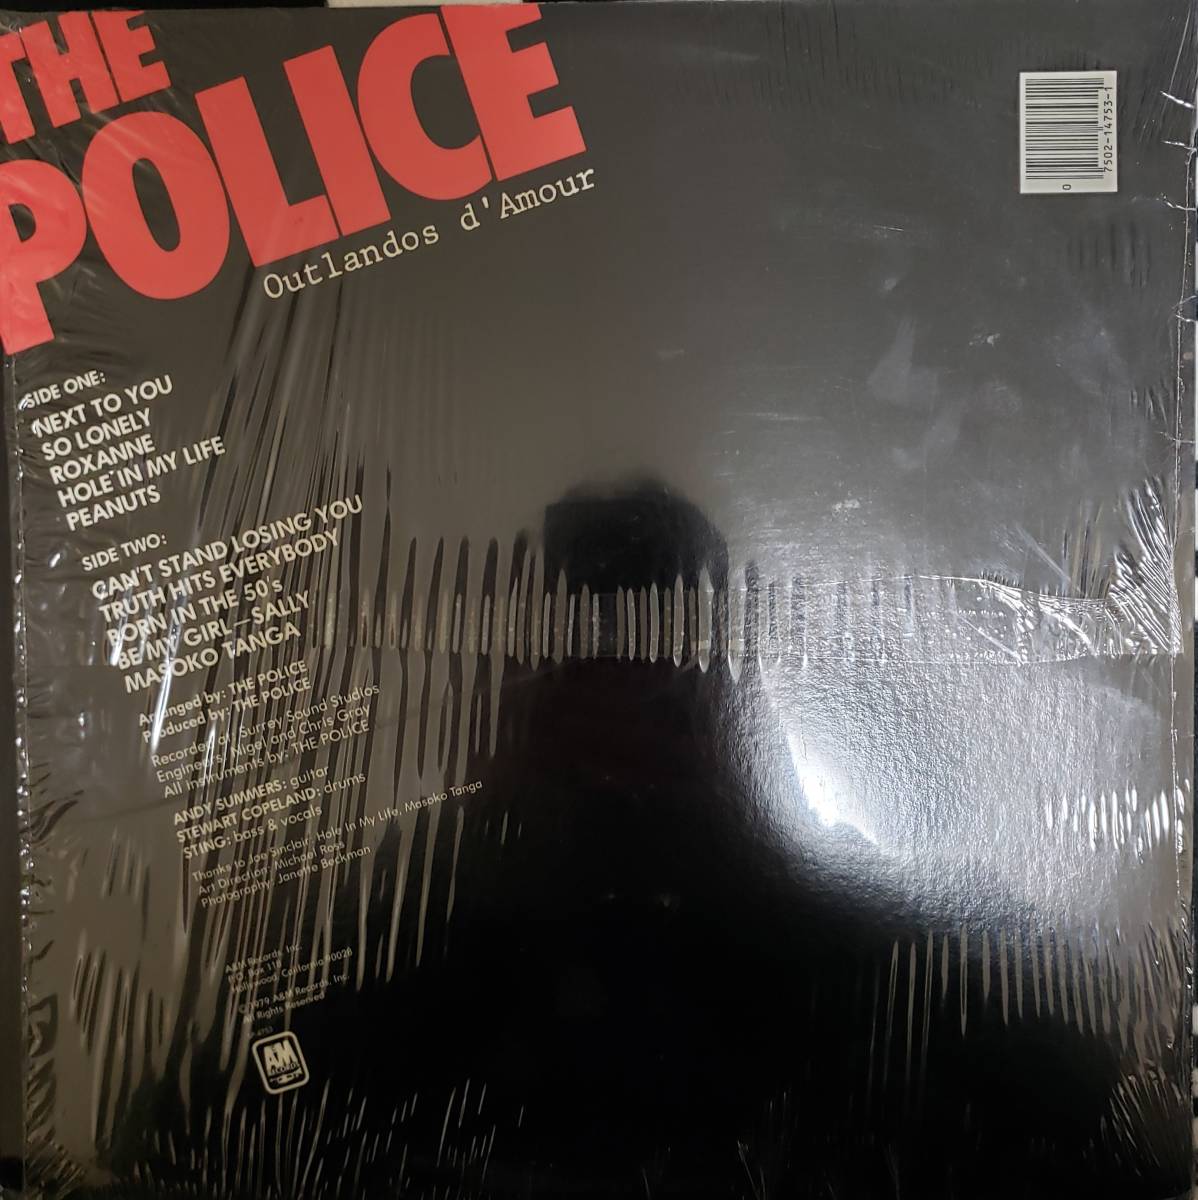 12inch USA盤 THE POLICE ■ Outlandos d' Amour ■ の画像7